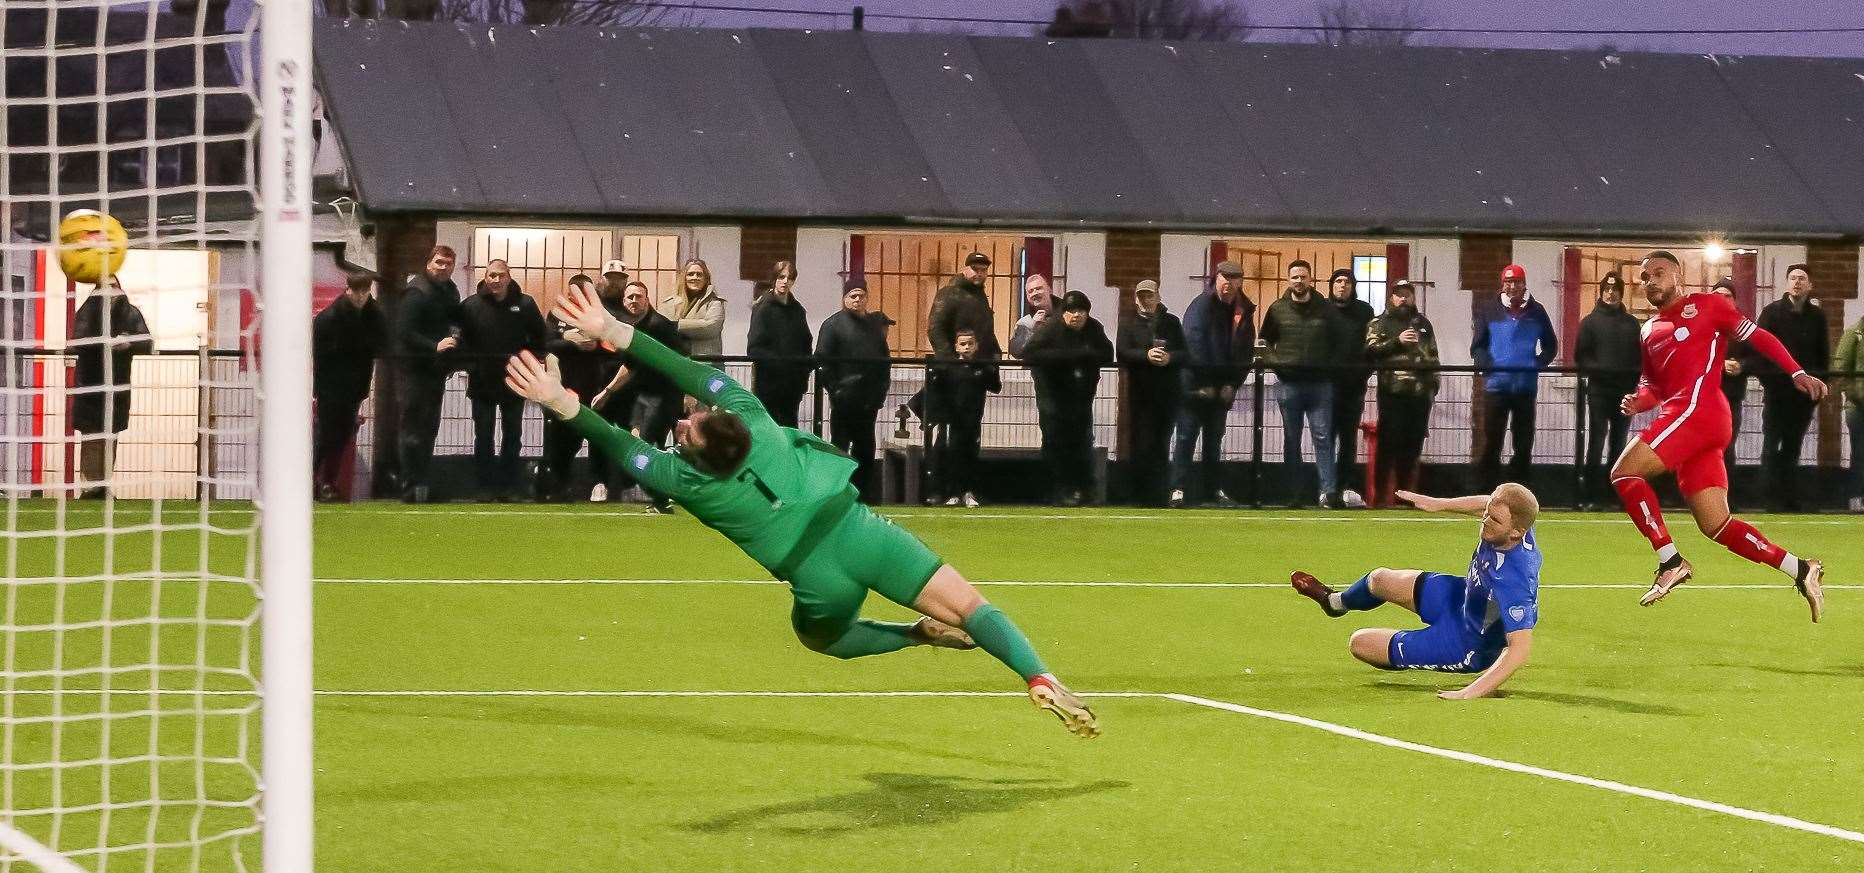 Dean Grant adds a late second in Whitstable's 2-0 weekend win against Tunbridge Wells. Picture: Les Biggs